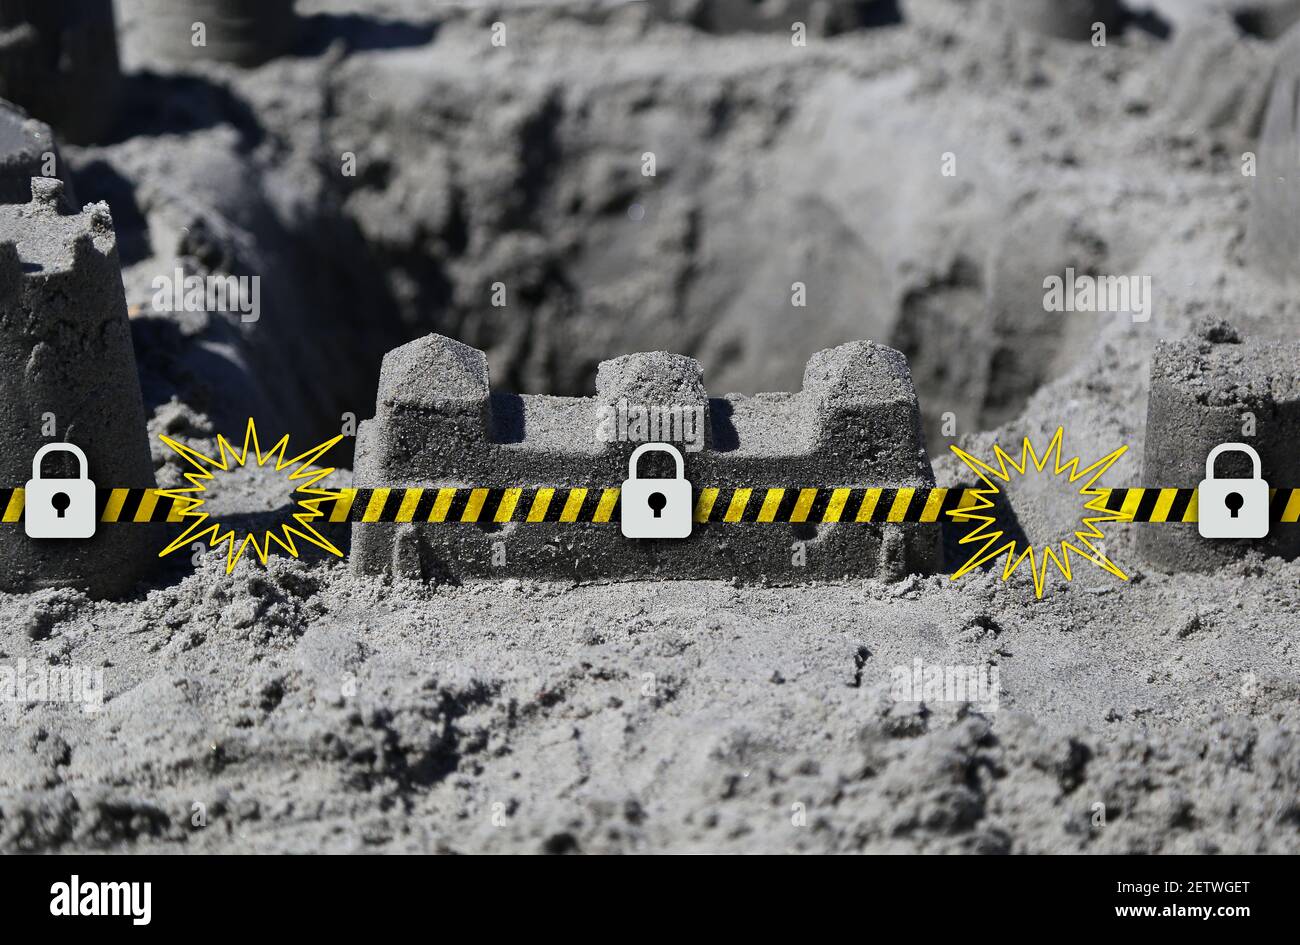 Beach sand castle security wall metaphor protecting computer and networks from virus and malware threats Stock Photo